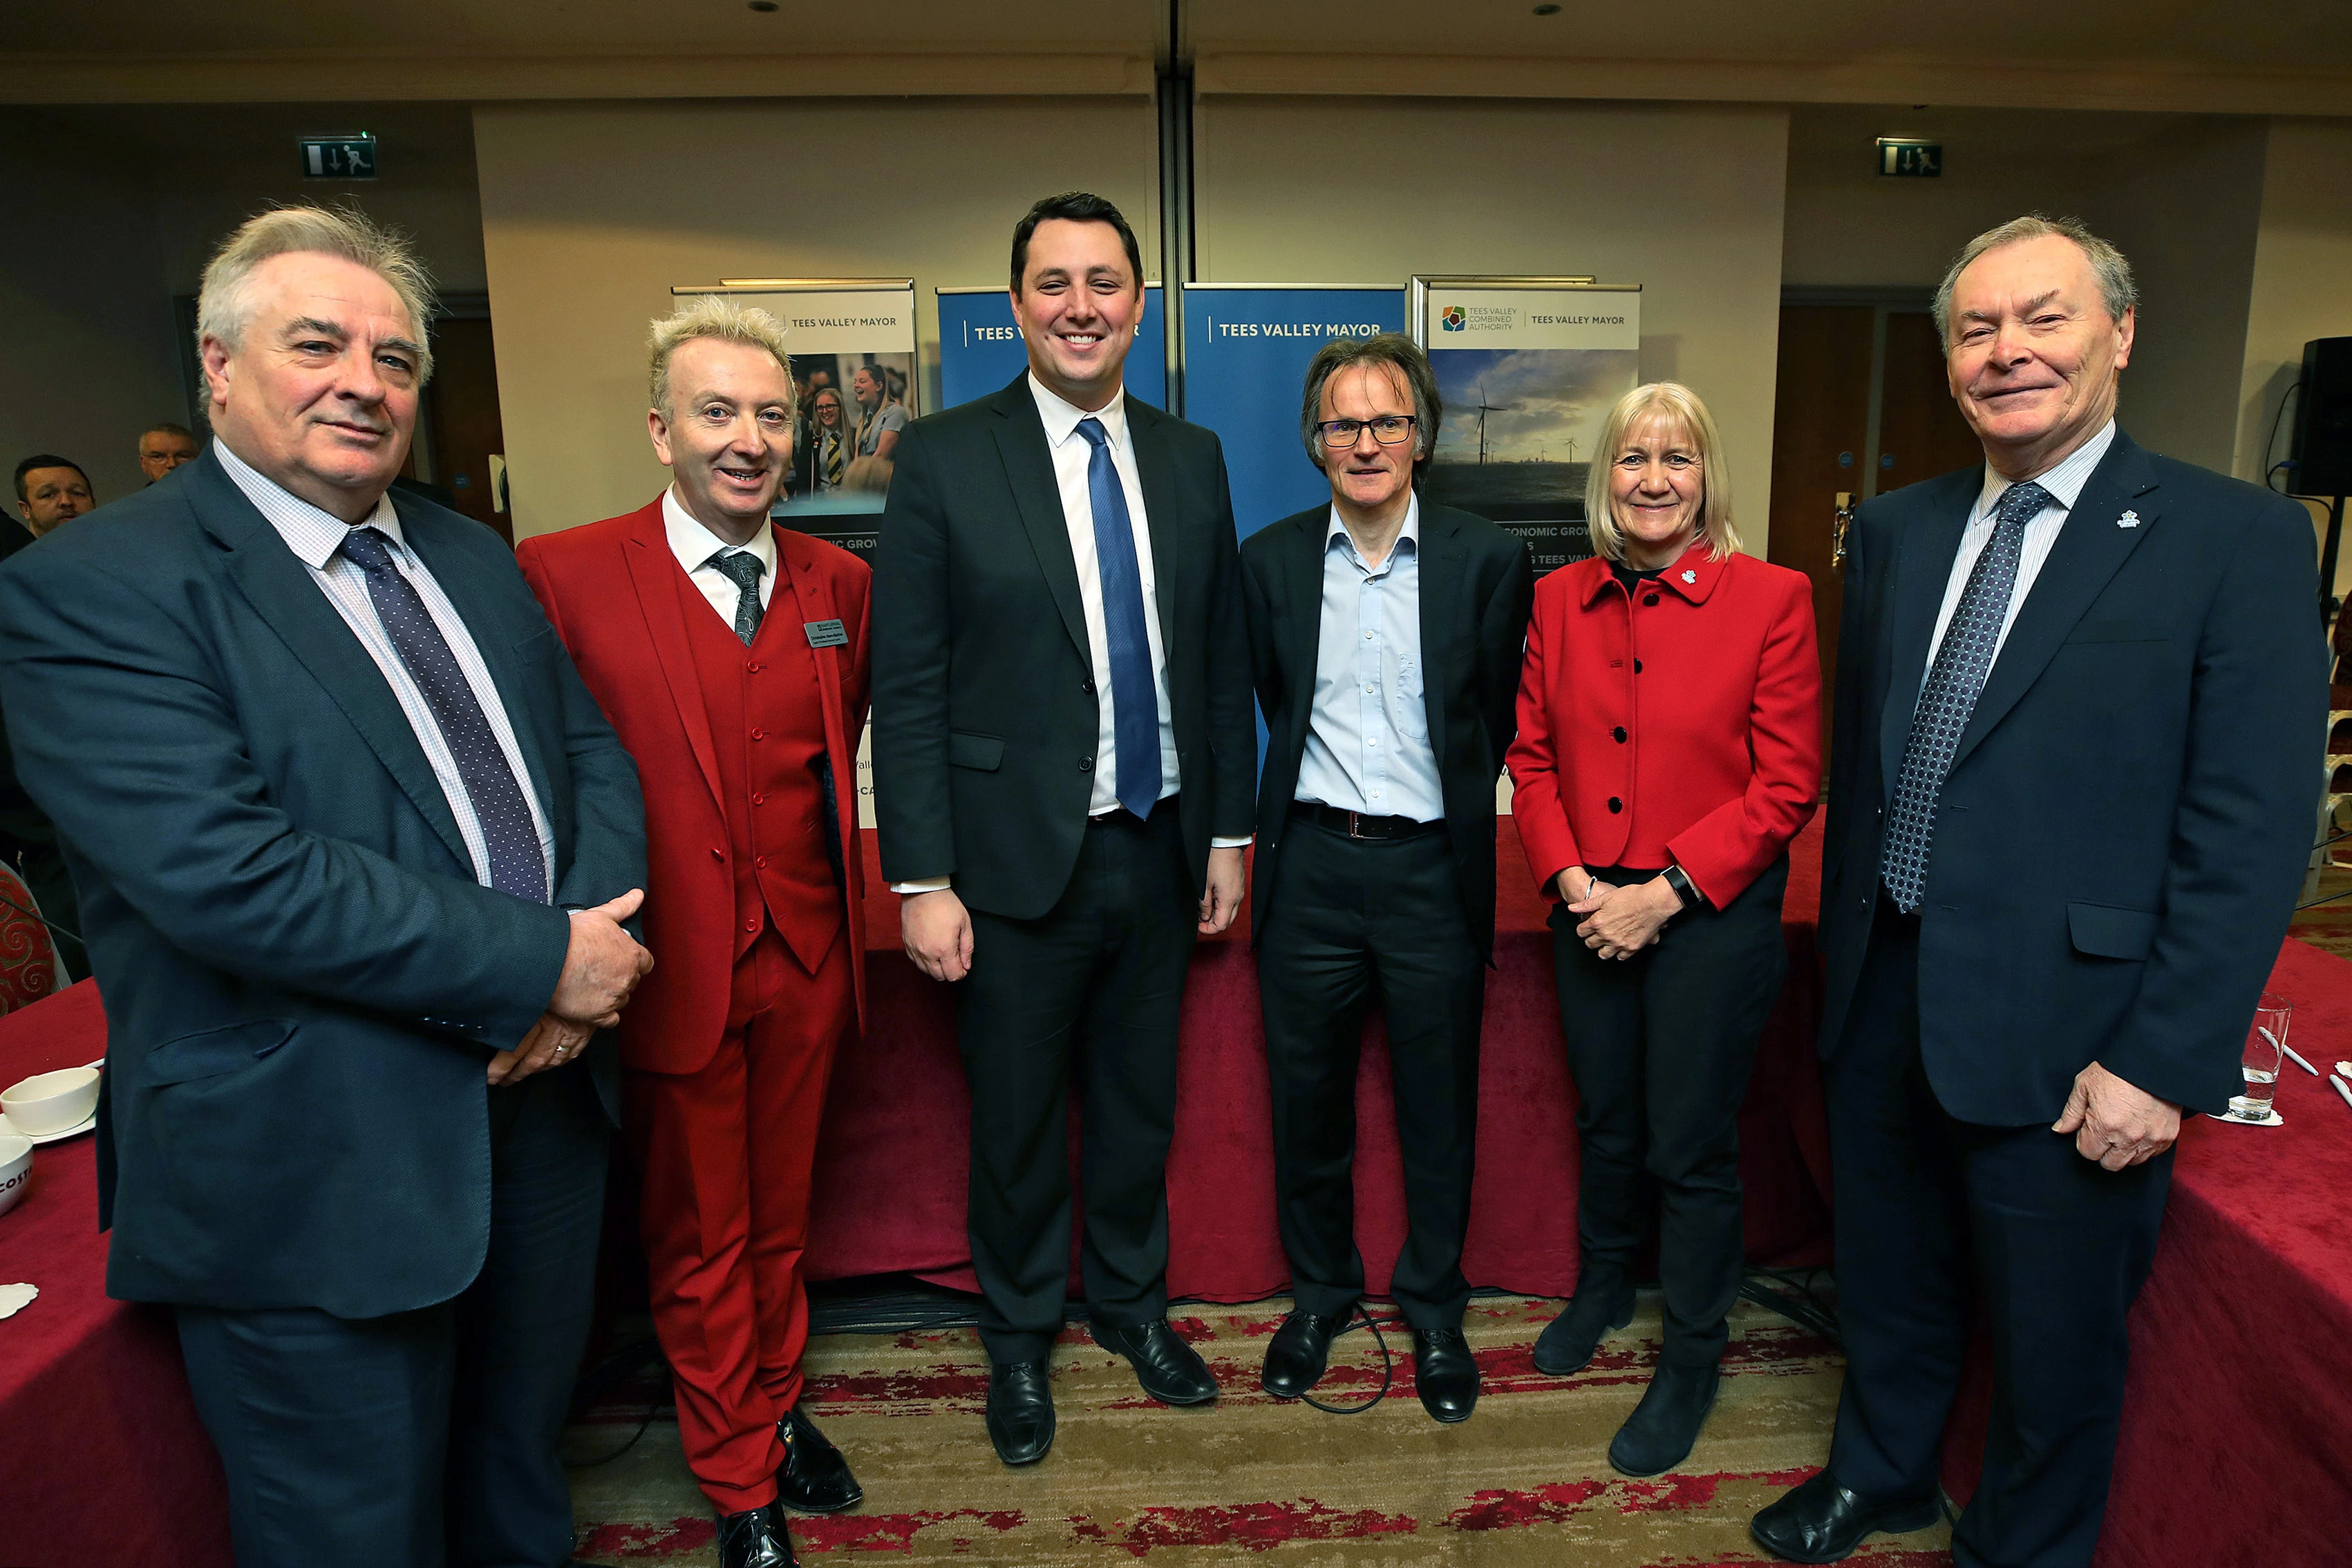 Tees Valley Mayor Ben Houchen (centre left) with the five Local Authority Leaders (L-R), Cllr Bob Cook, Cllr Christopher Akers-Belcher, Cllr Stephen Harker, Cllr Sue Jeffrey and Mayor Dave Budd